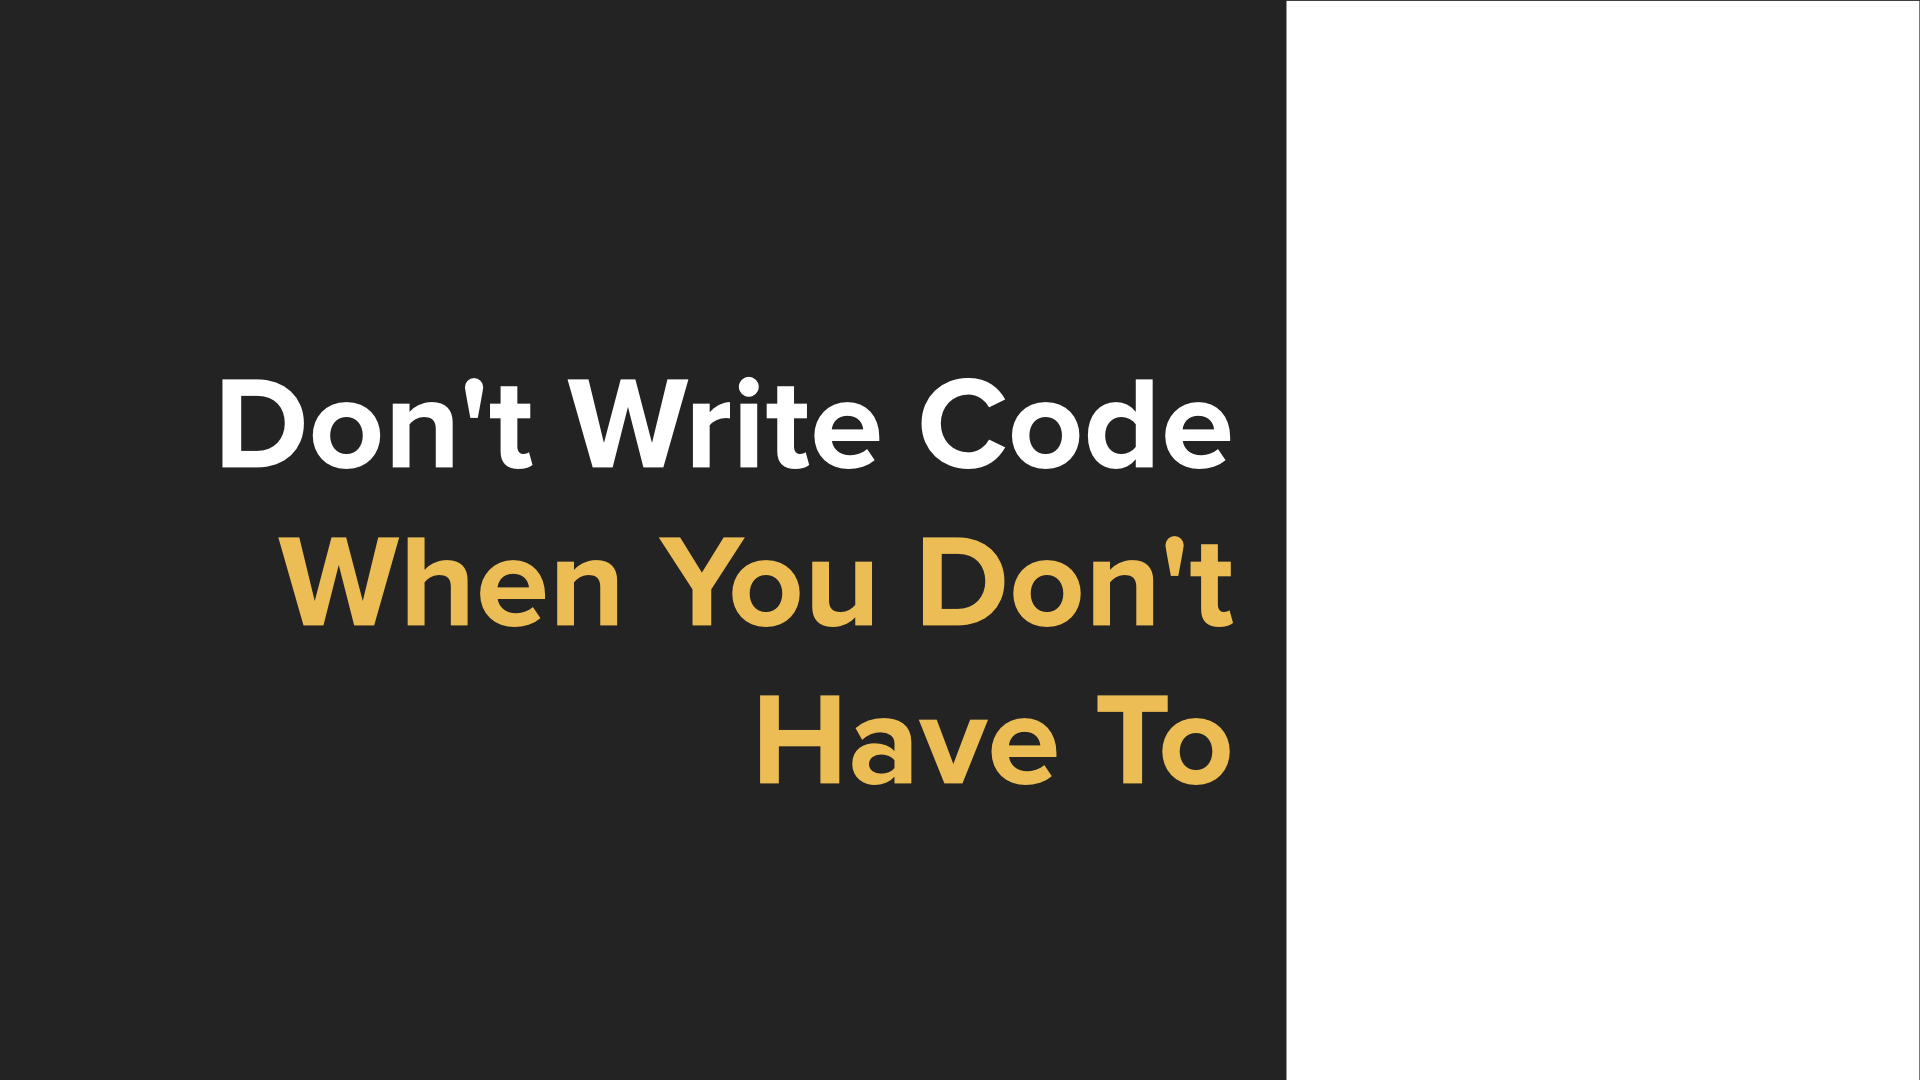 Don't Write Code When You Don't Have To